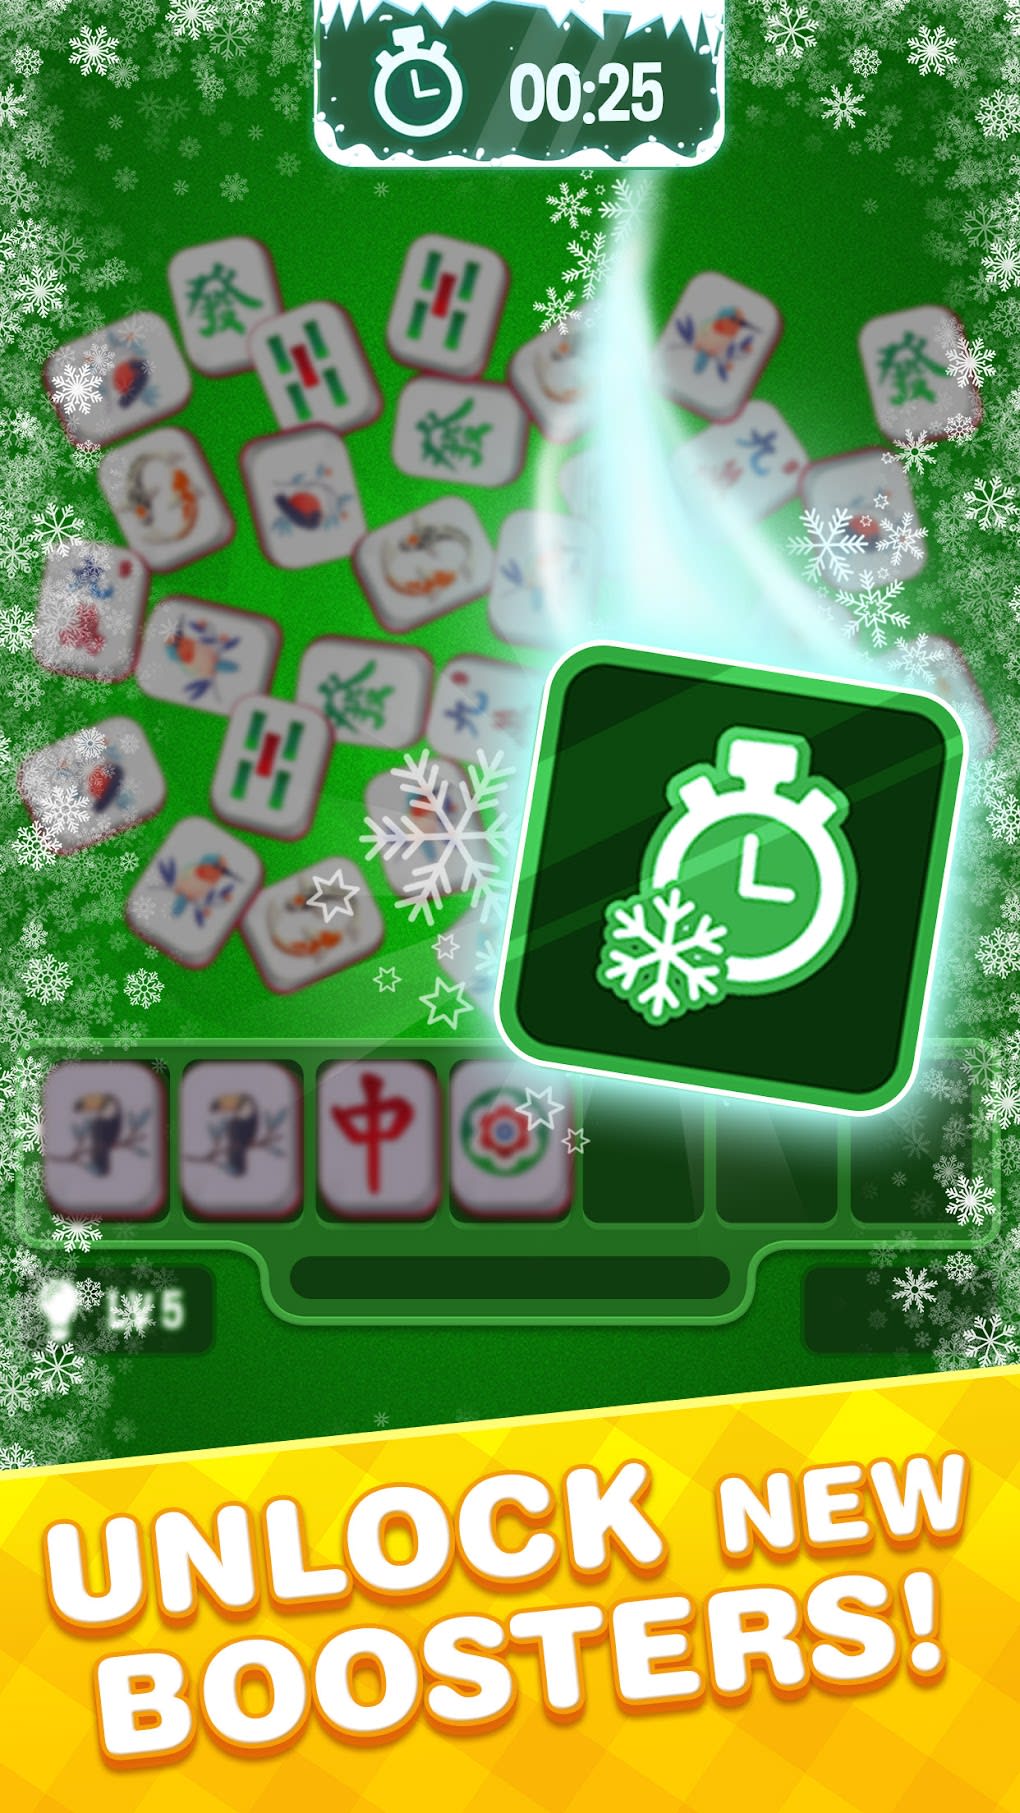 Tap Tiles - Mahjong 3D Puzzle - Apps on Google Play